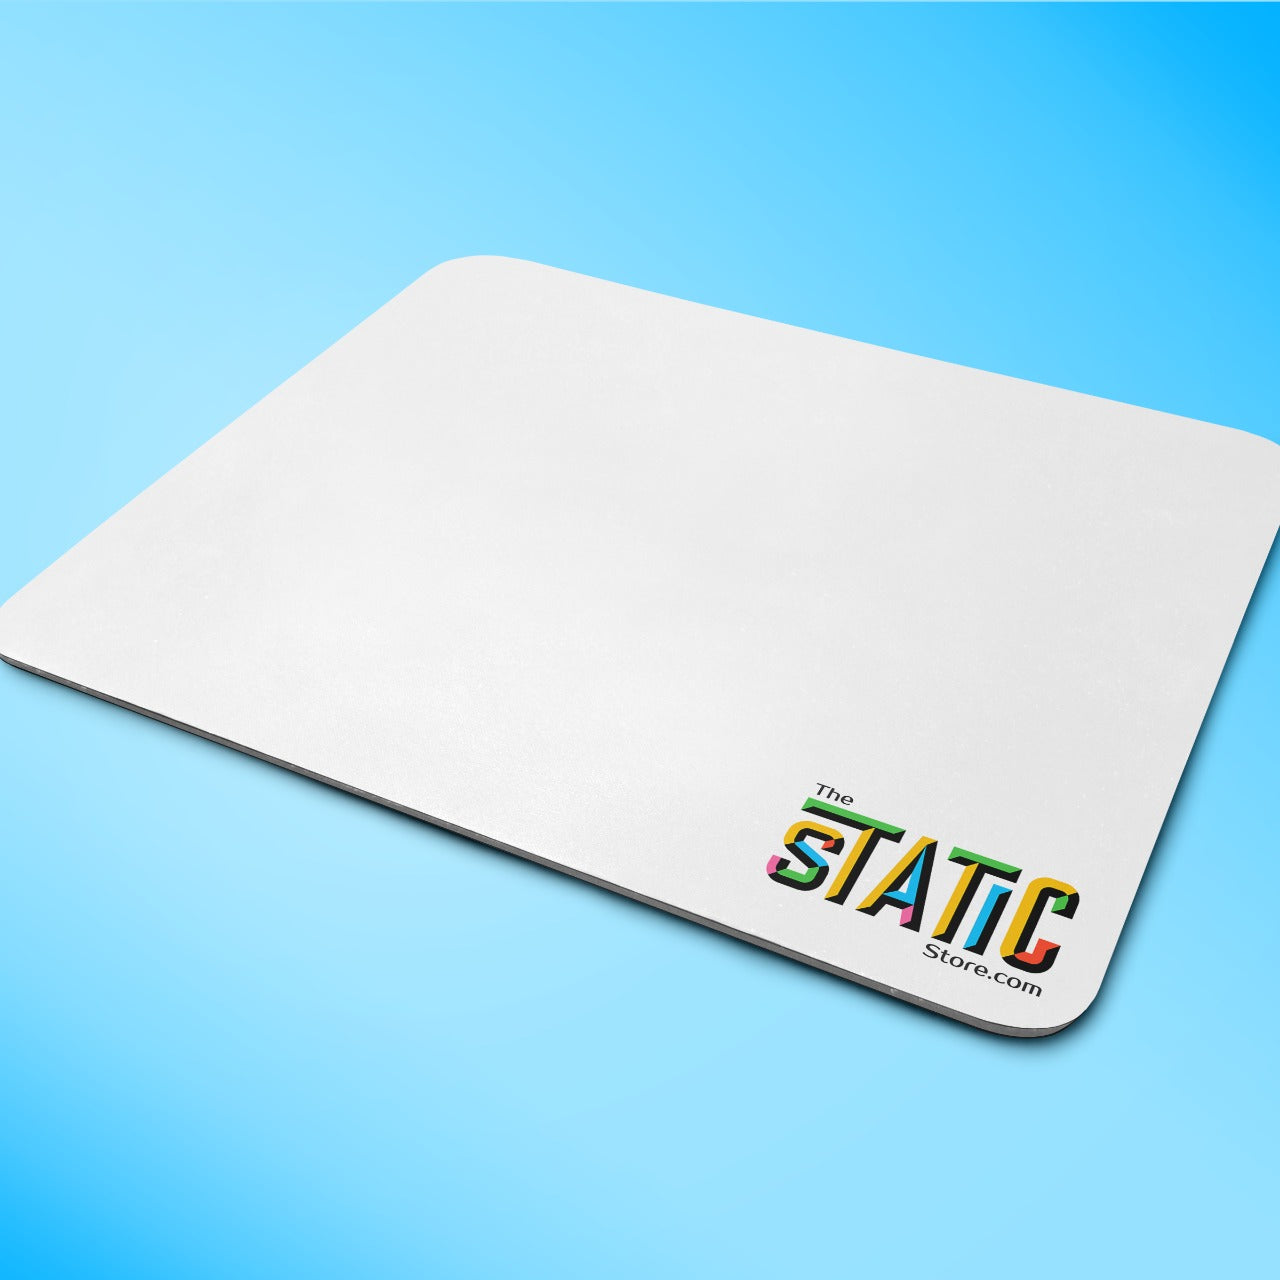 Make Your Own Mouse Pad!